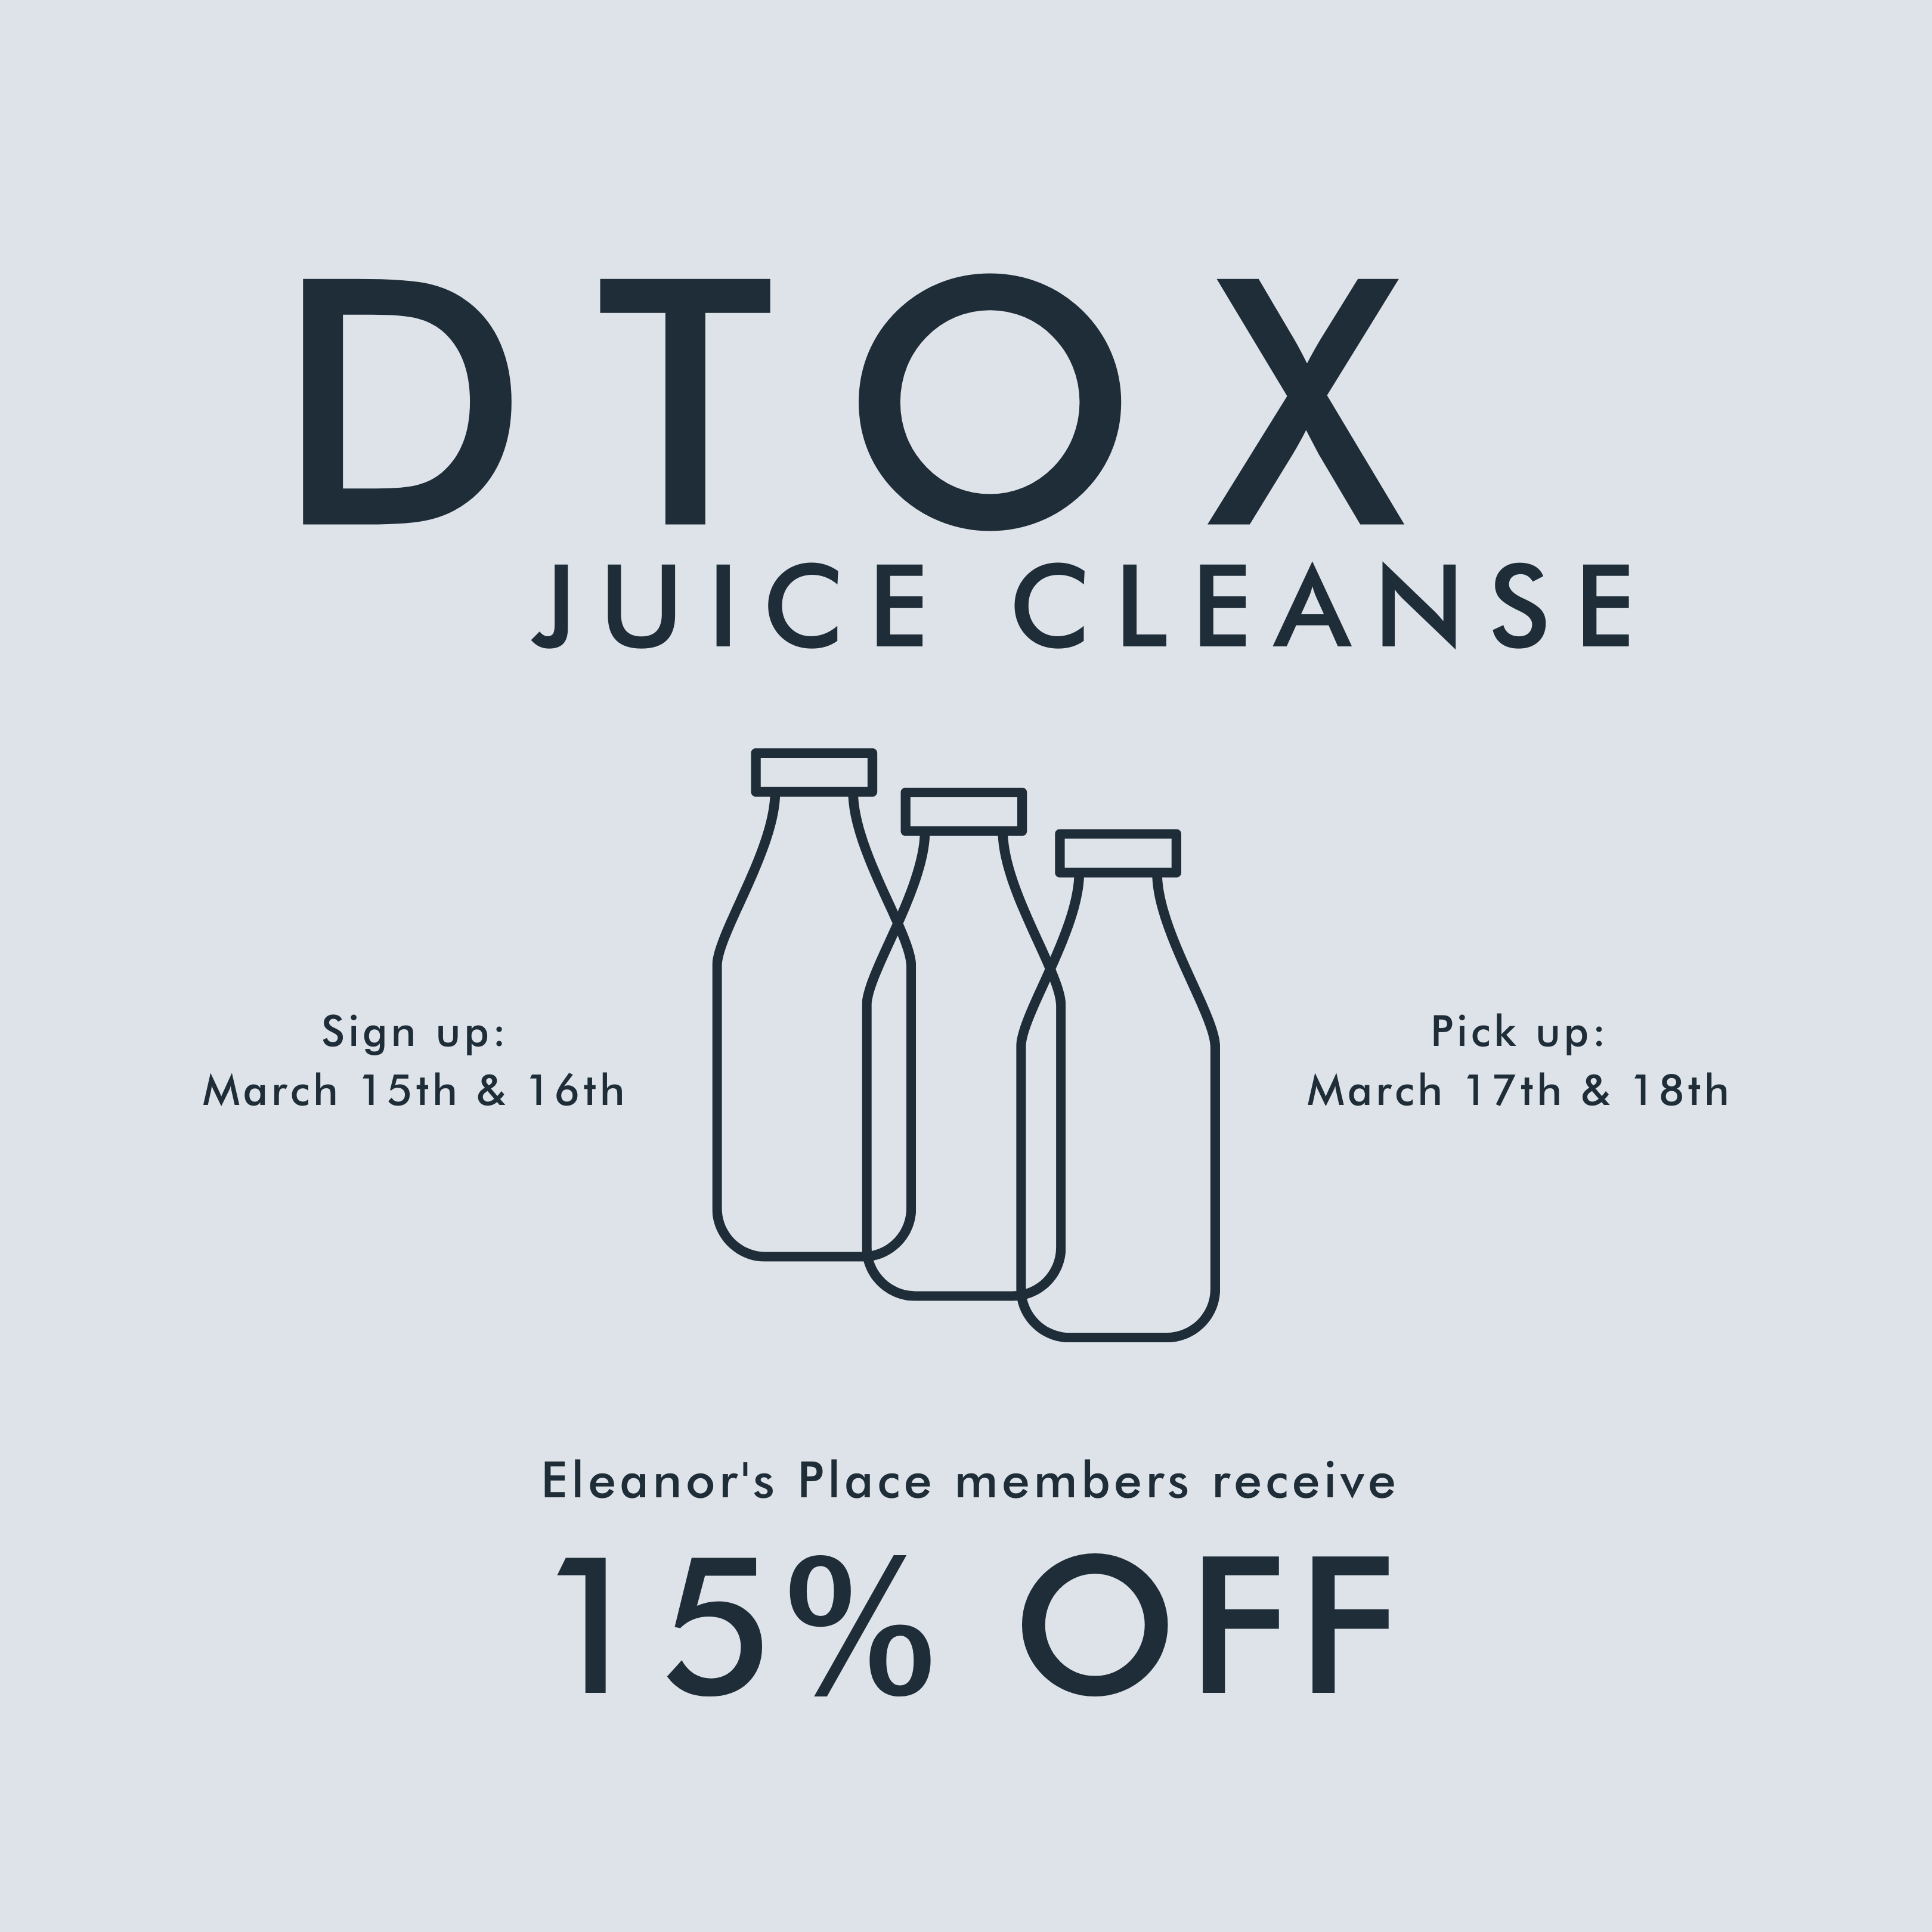 Order Your dtox Juice Cleanse!